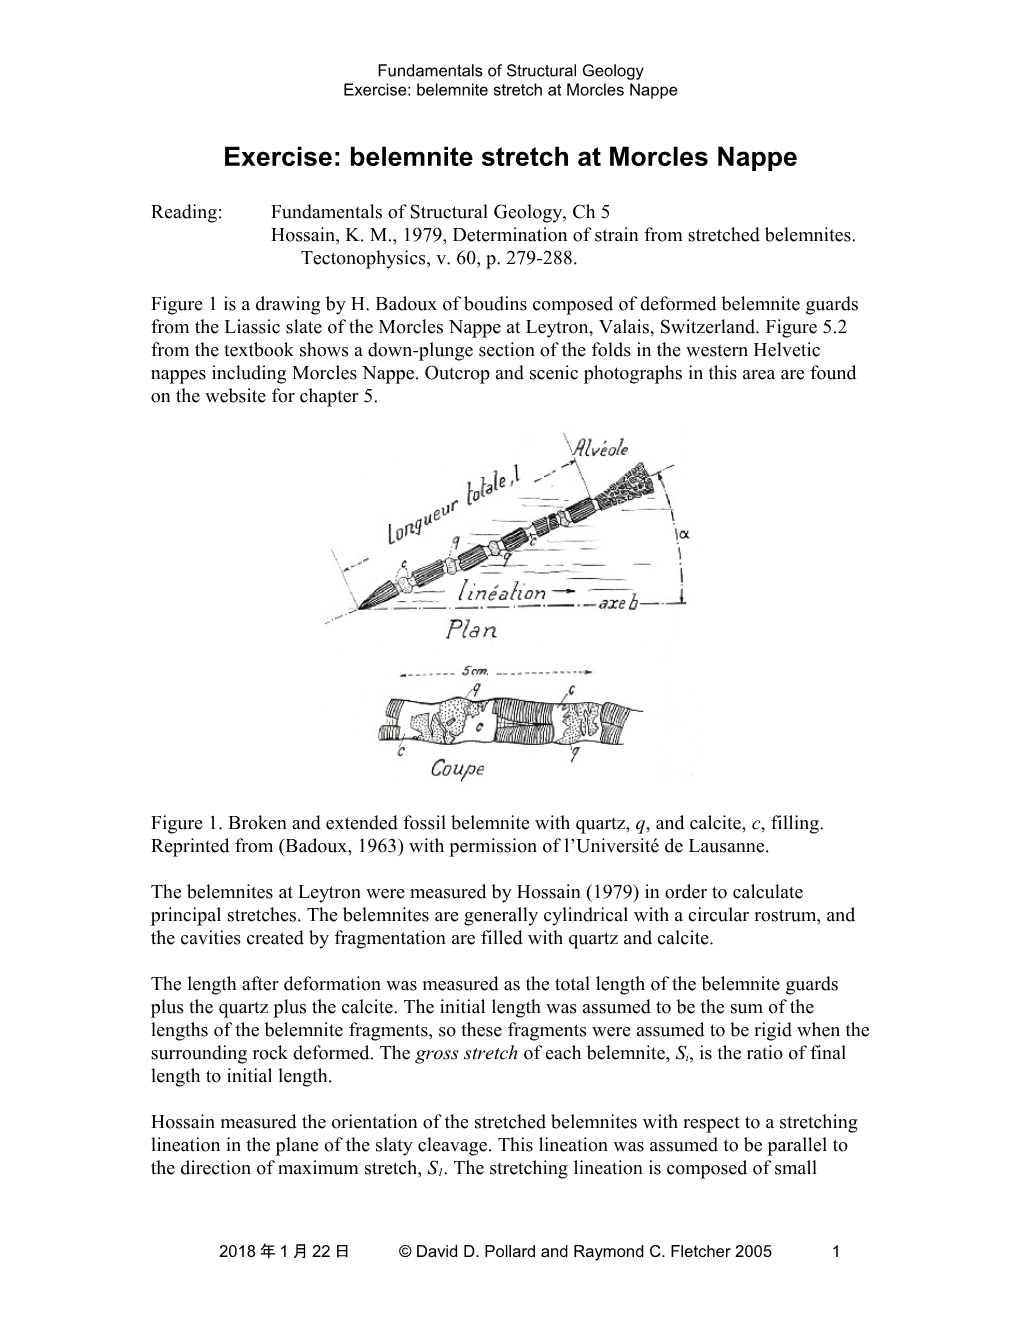 Exercise: Belemnite Stretch at Morcles Nappe